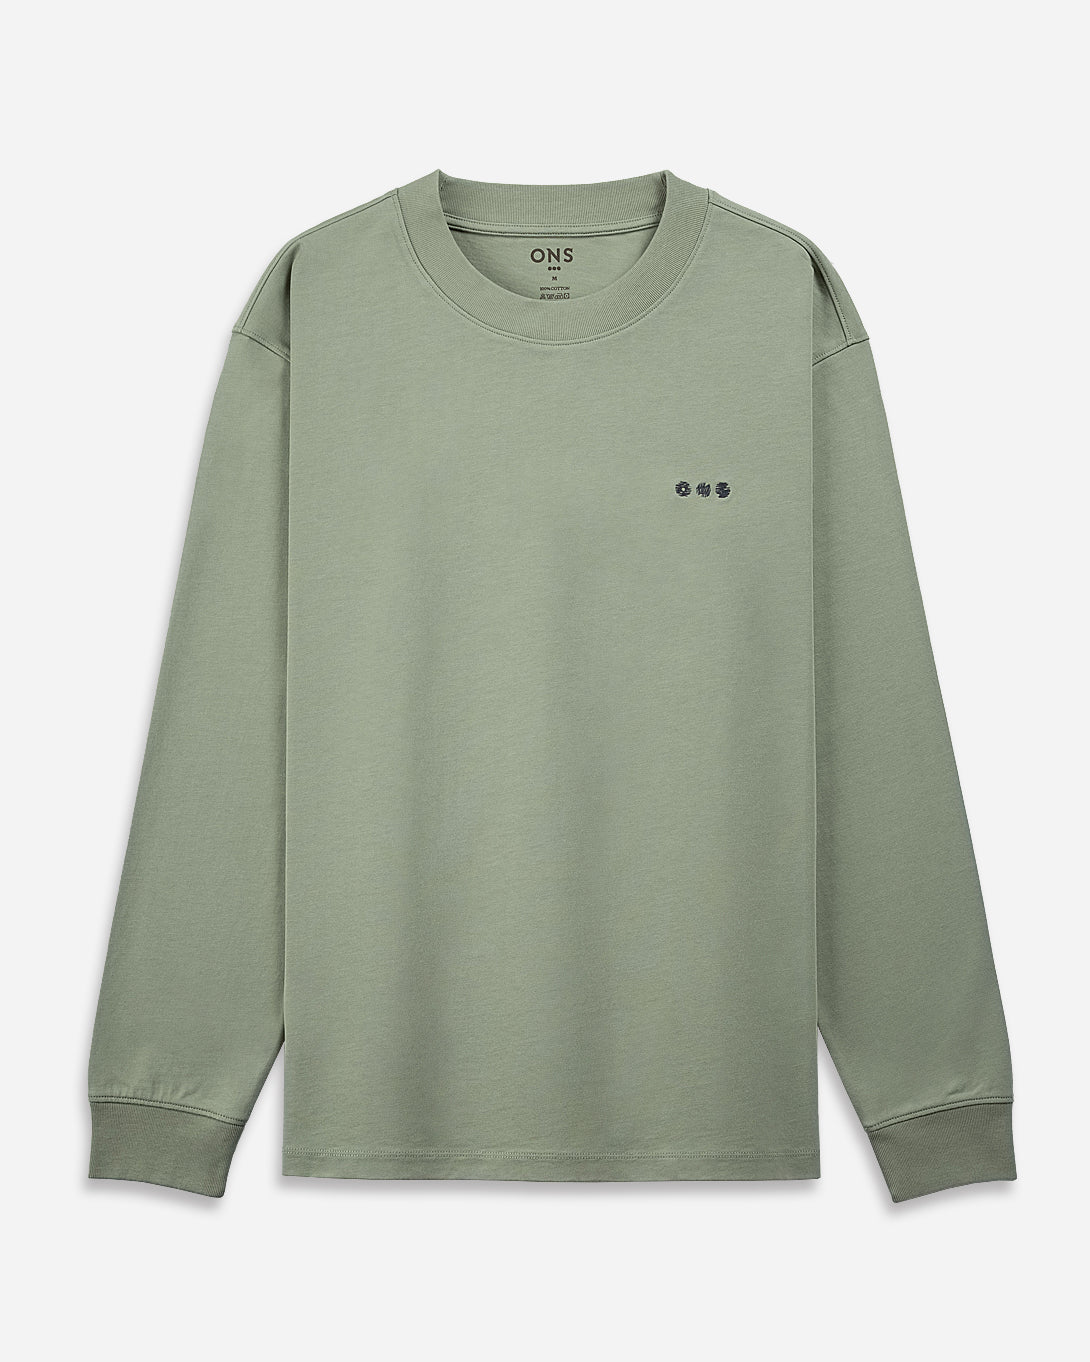 Seagrass Long Sleeve Mens Graphic Tee